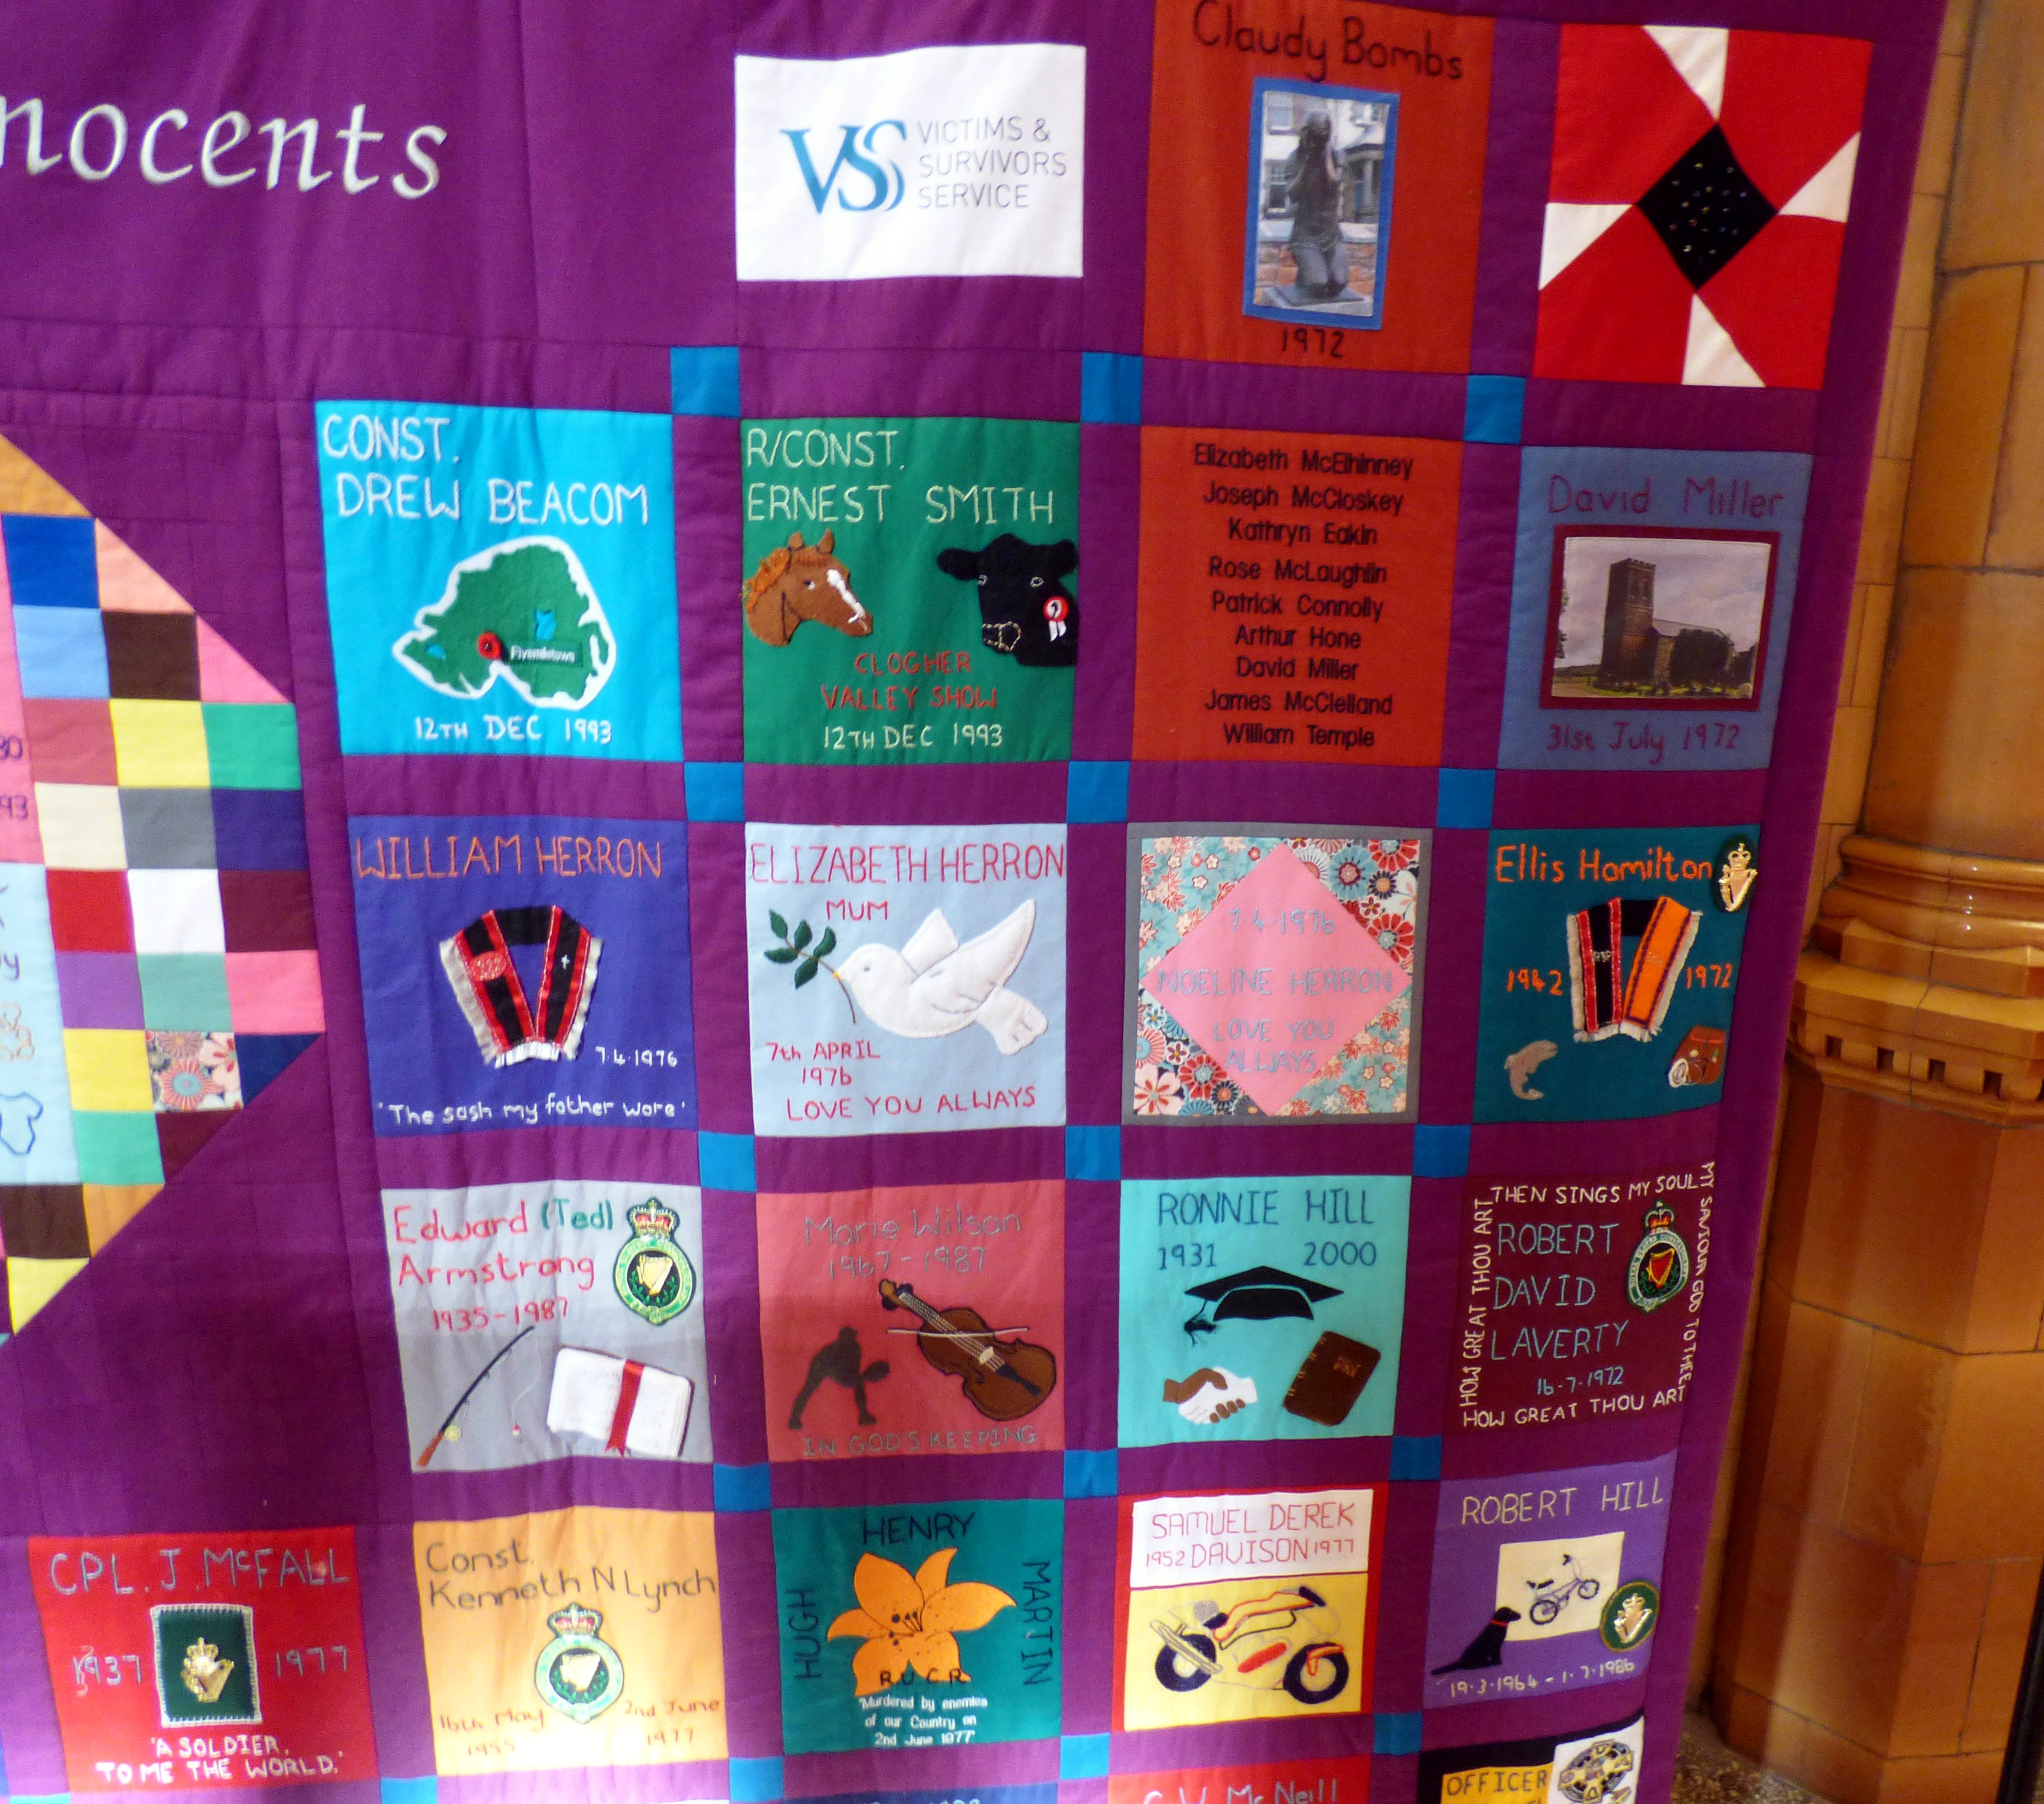 (detail) A PATCHWORK OF INNOCENTS, "A Tribute to Innocents" quilt exhibition, Victoria Gallery, March 2018